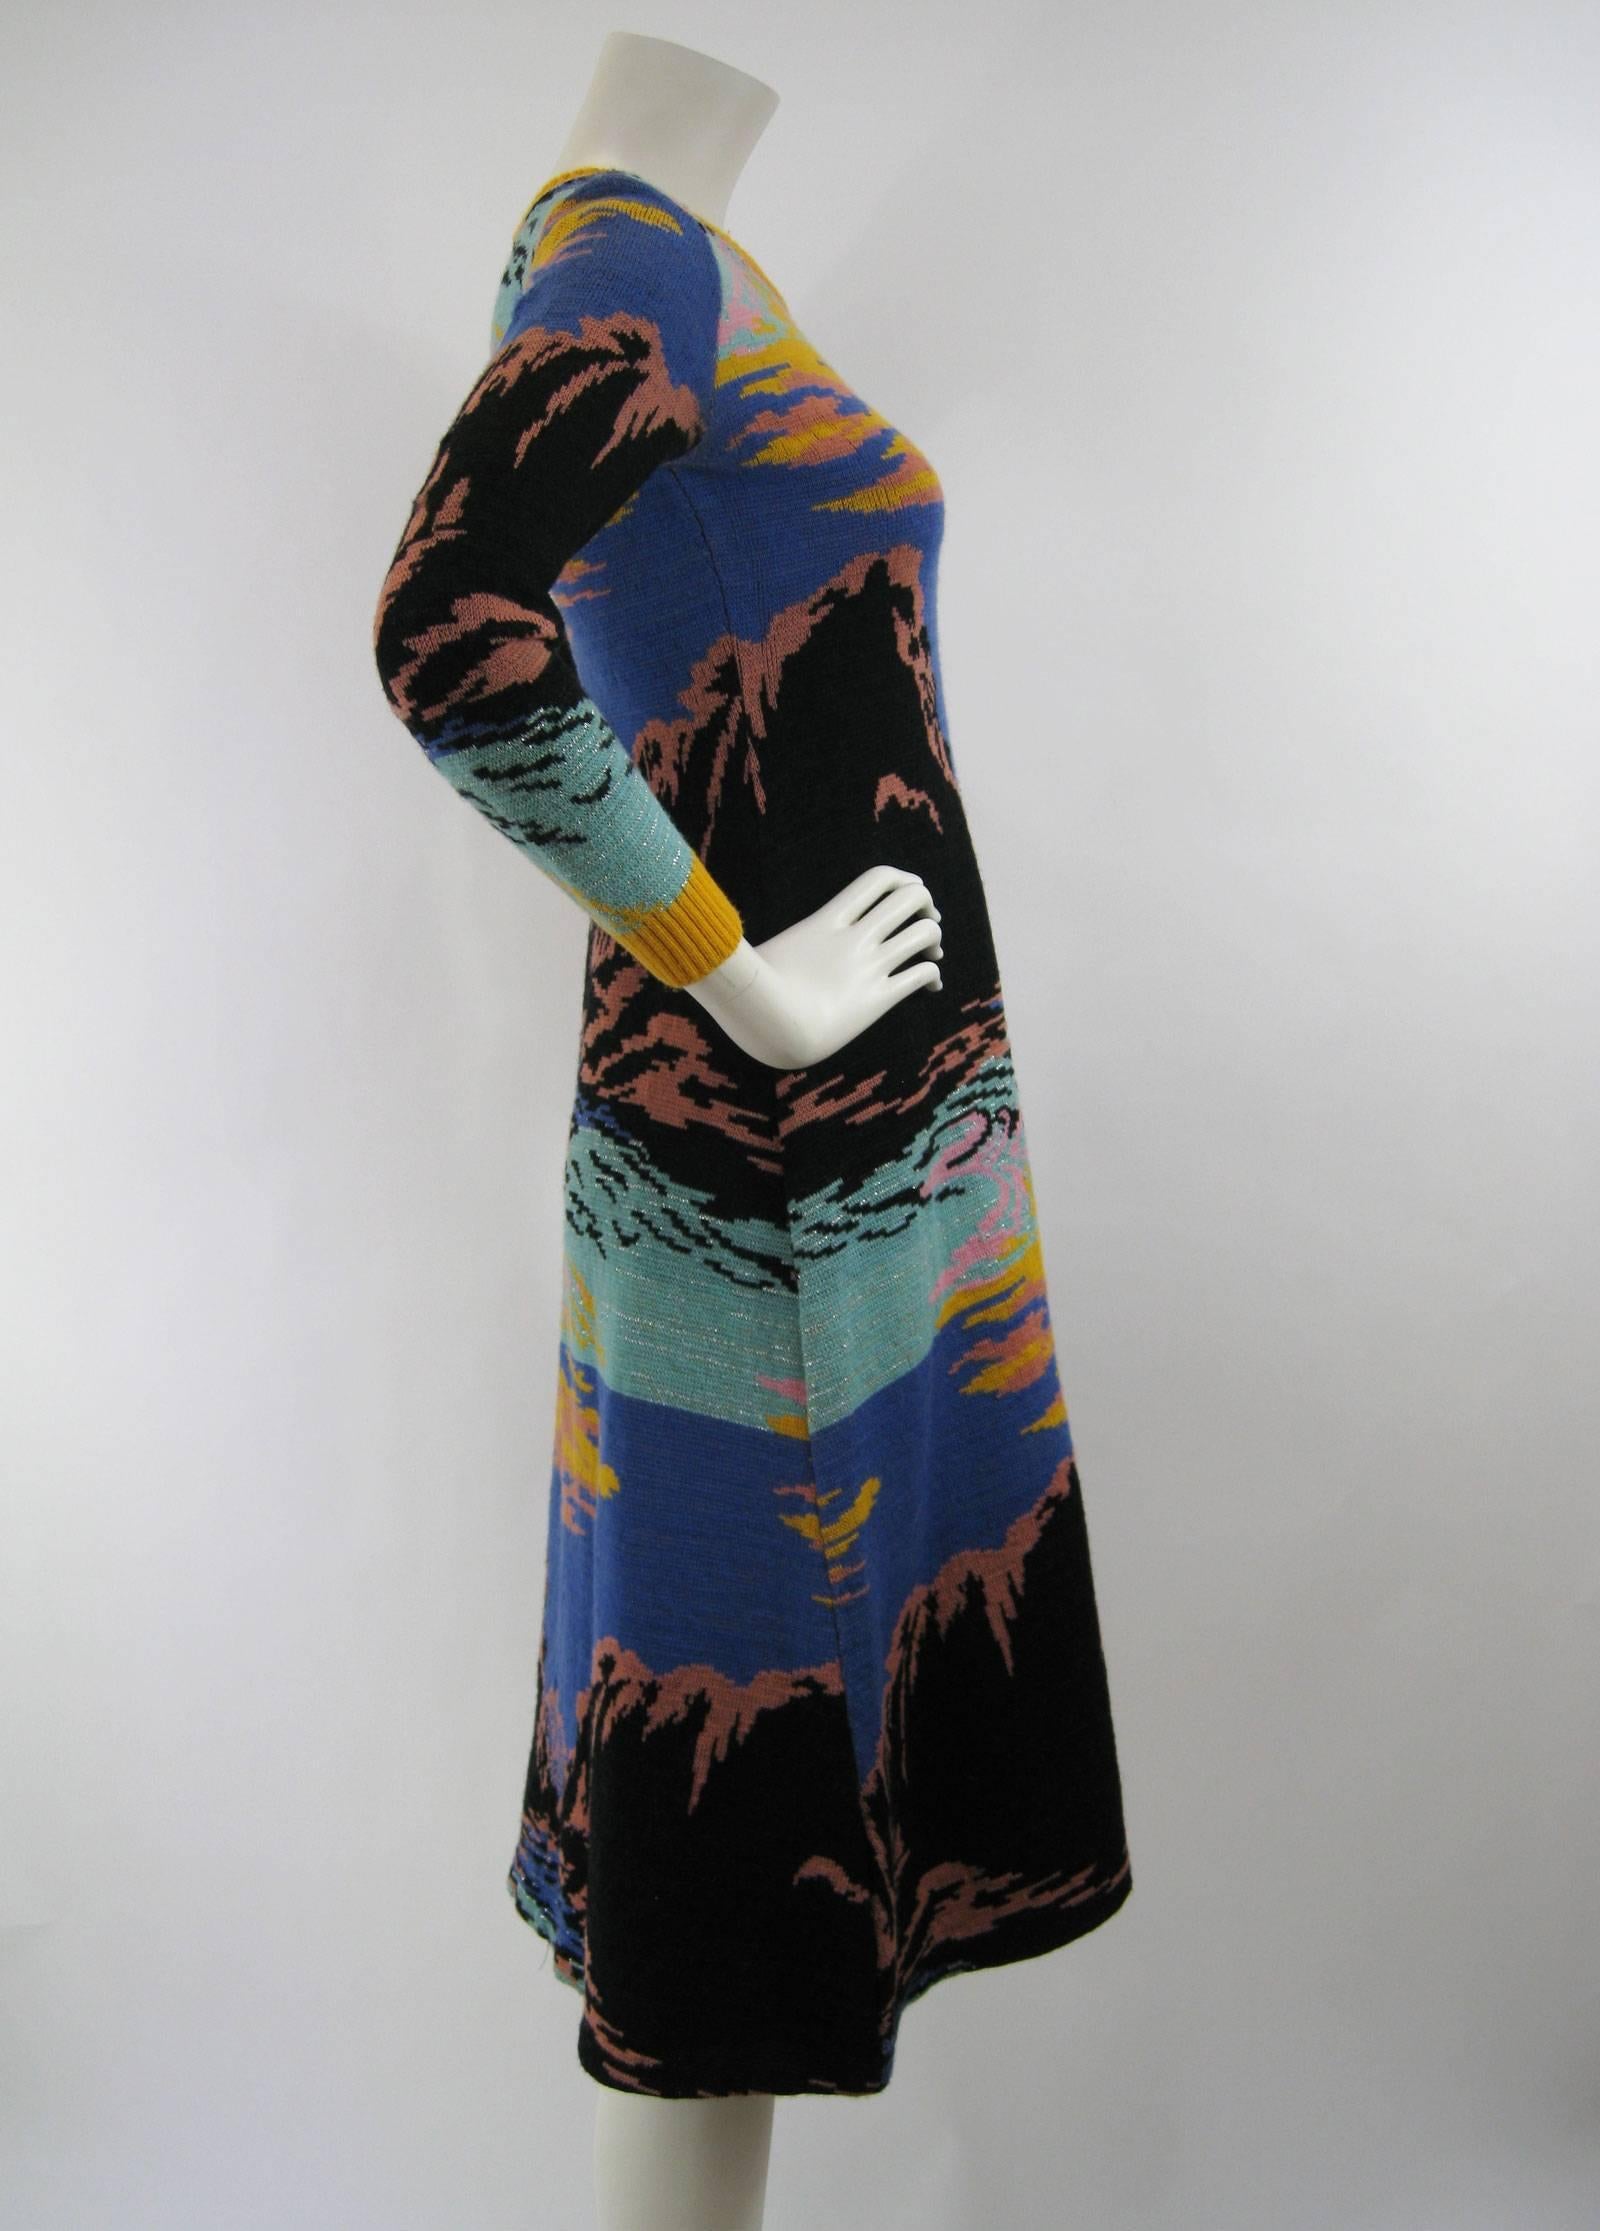 Stunning Alley Cat sweater dress by Betsey Johnson.
Circa 1970's.
Vibrant sunset hues.
Hourglass shape.
Mid calf length.
Ribbed trim
Soft wool. There is a fair amount of stretch in the dress.
Unlined.
No tagged size .

This is in good pre-owned